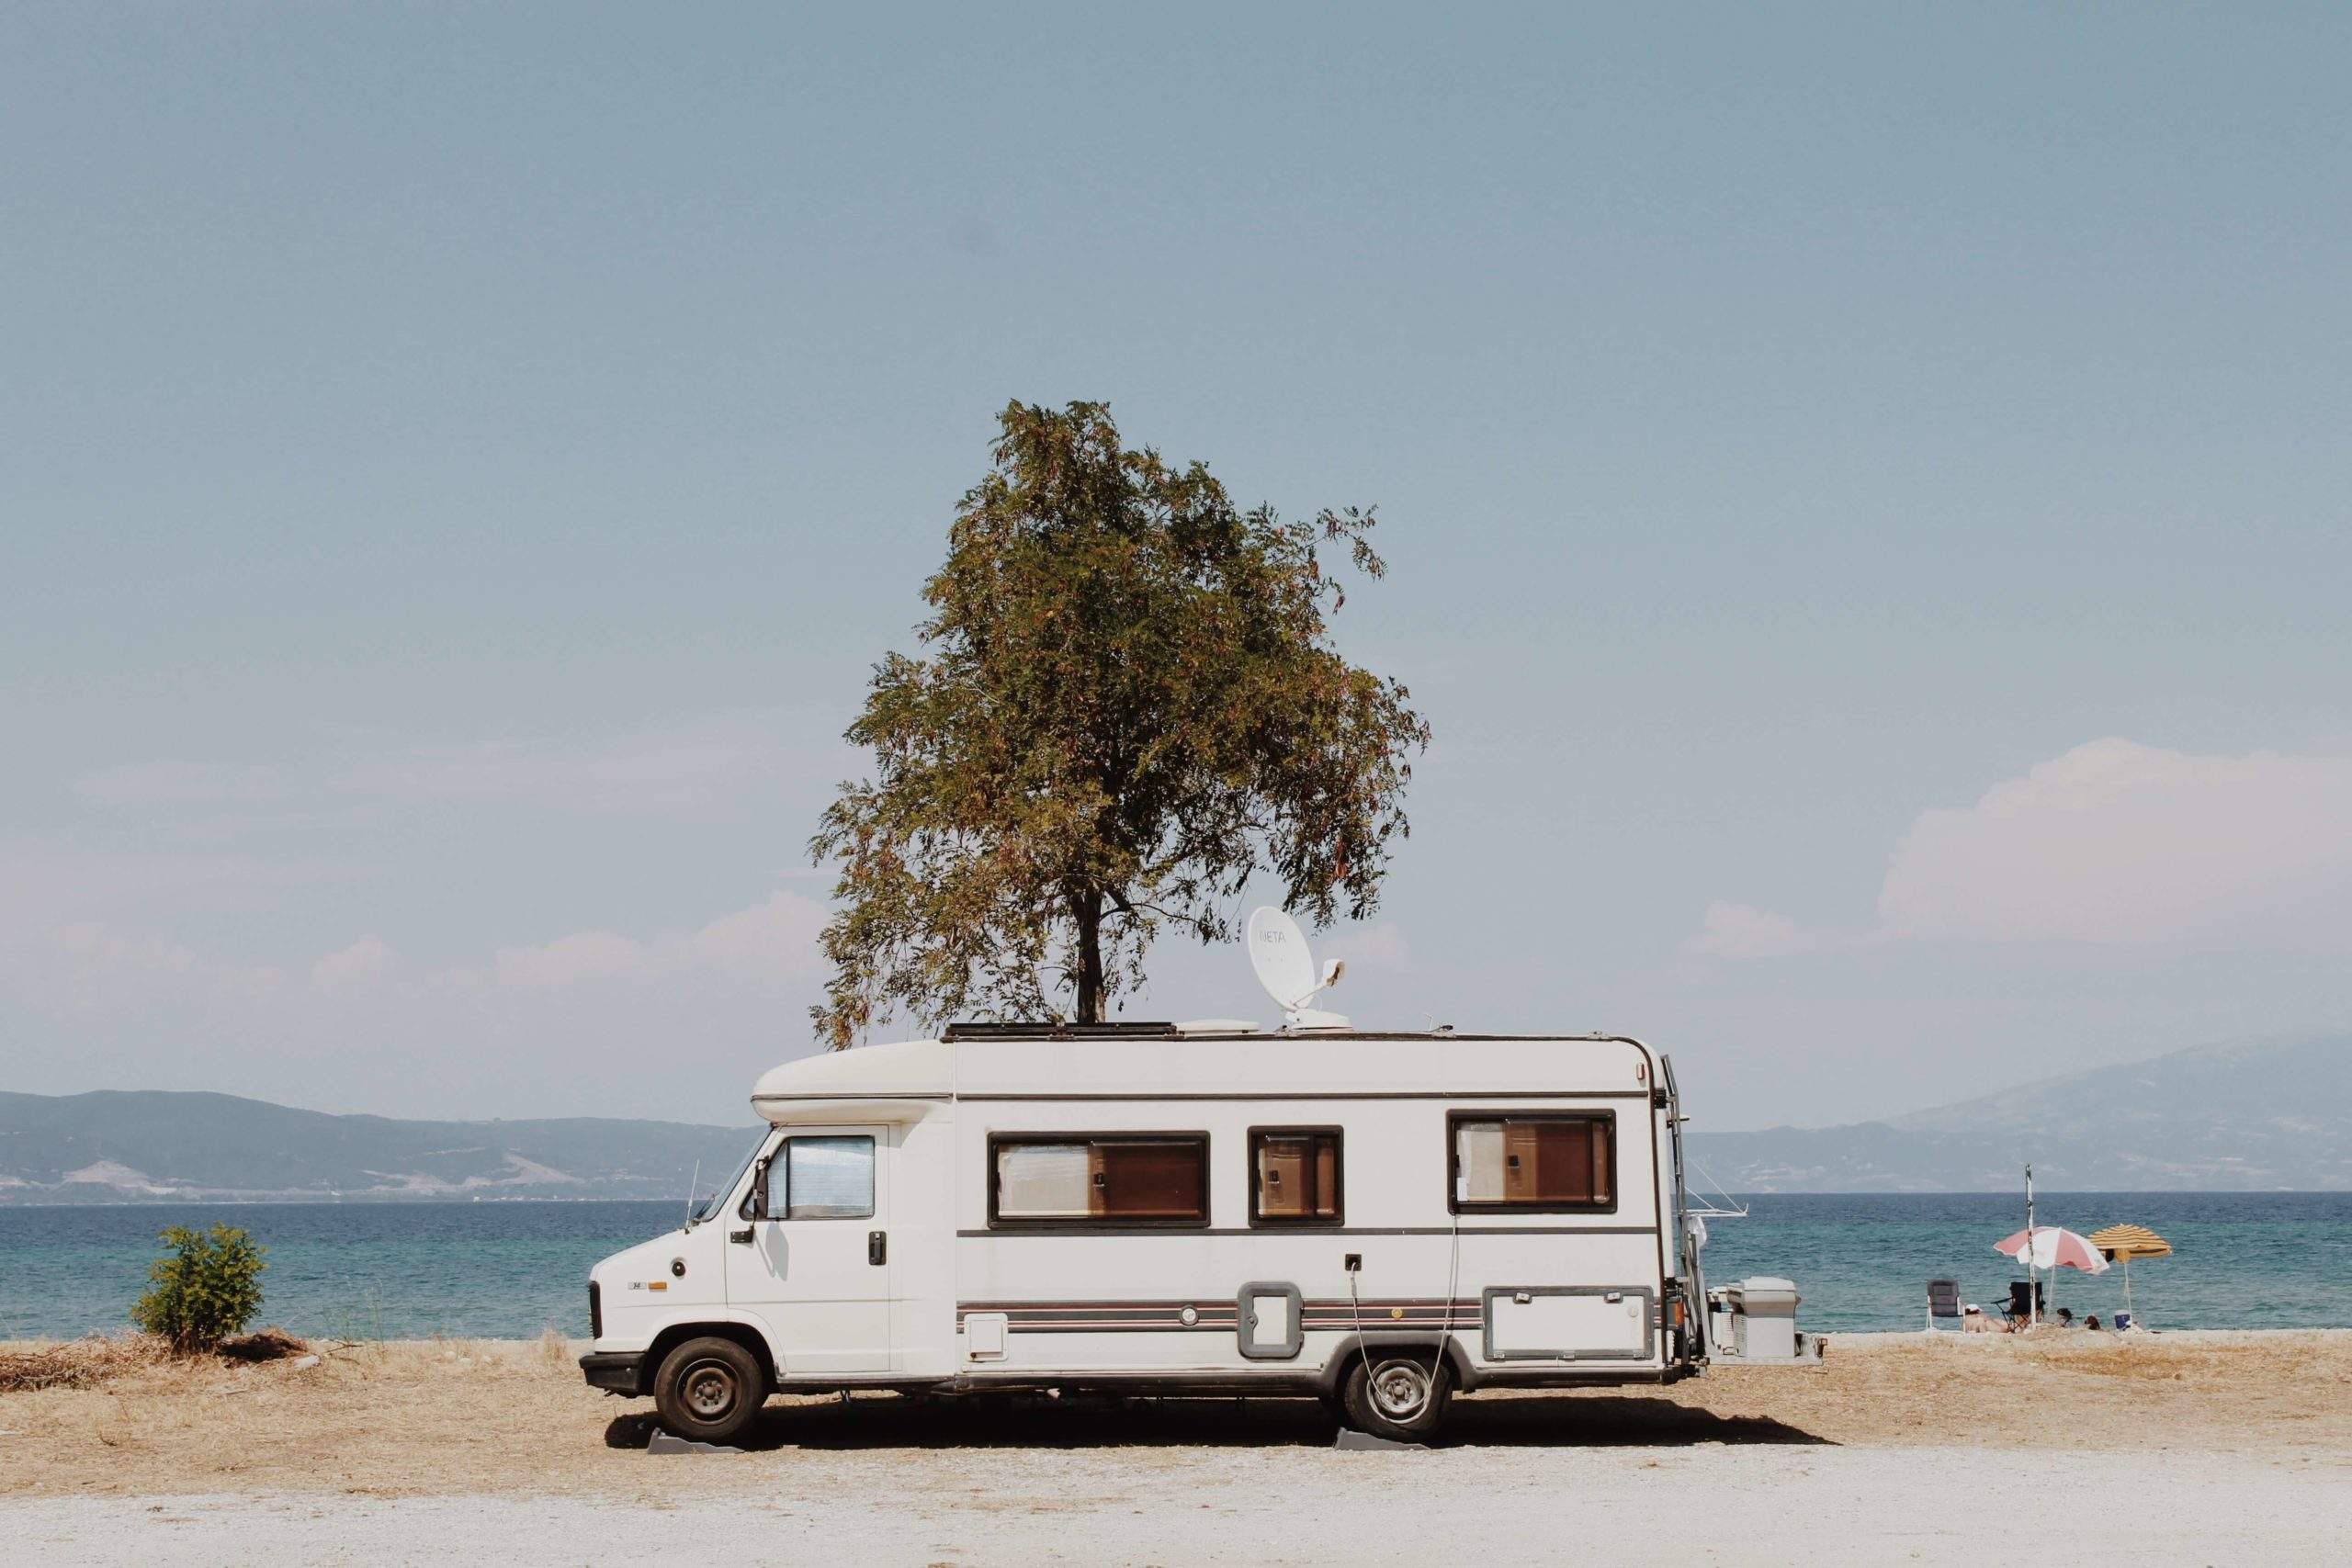 RV Rental: You Only Pay for What You Need